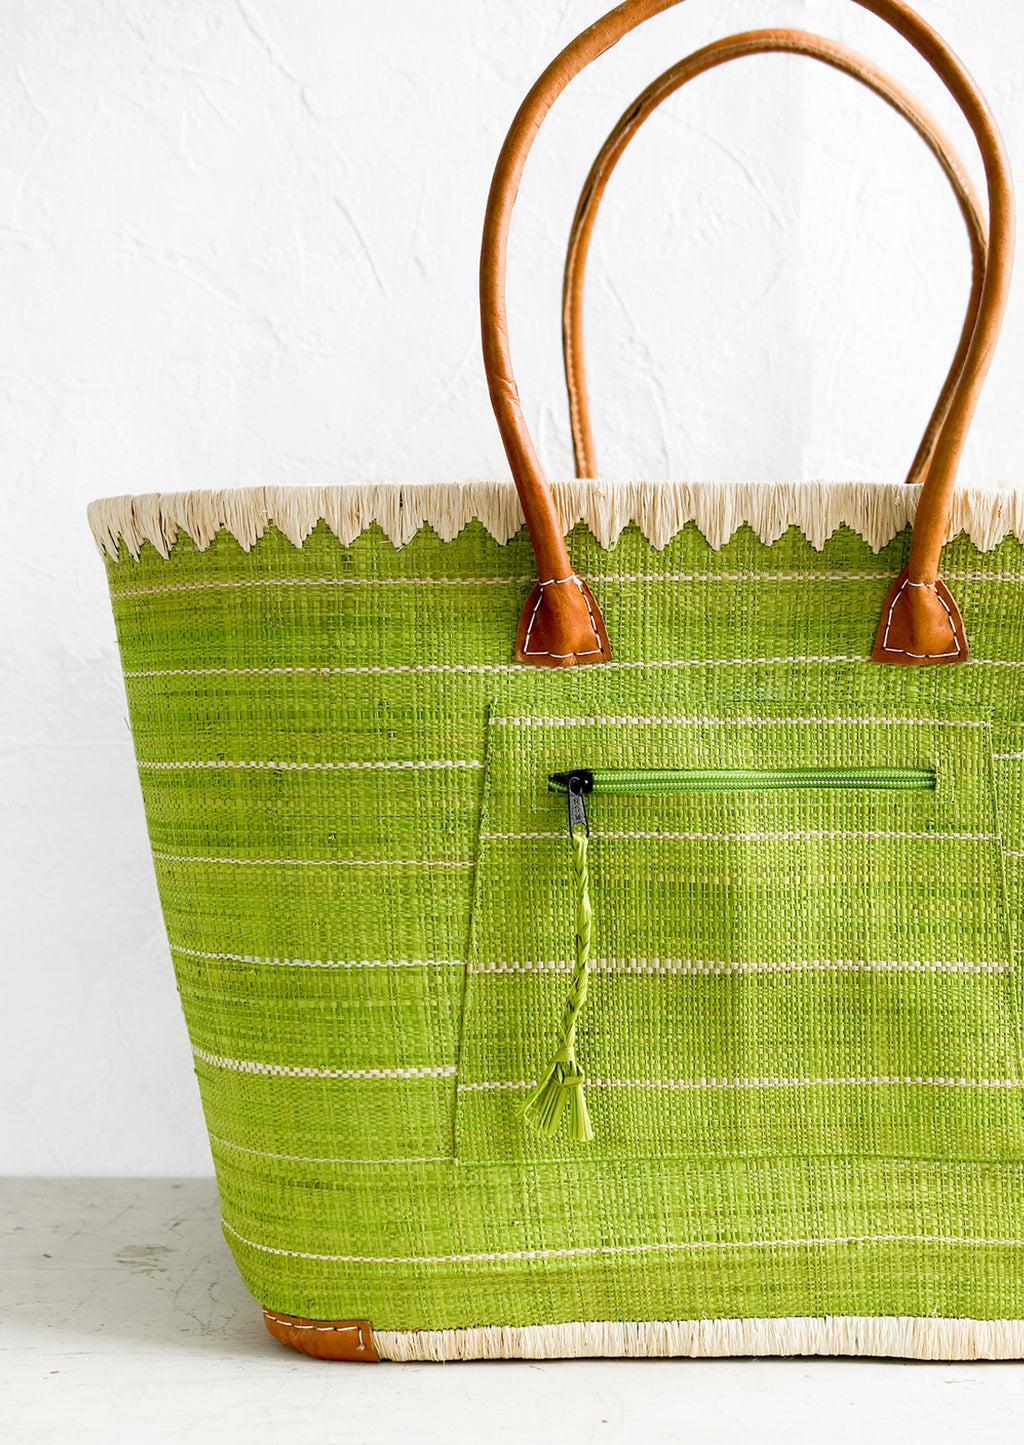 2: A raffia tote bag in green stripes with leather handles.